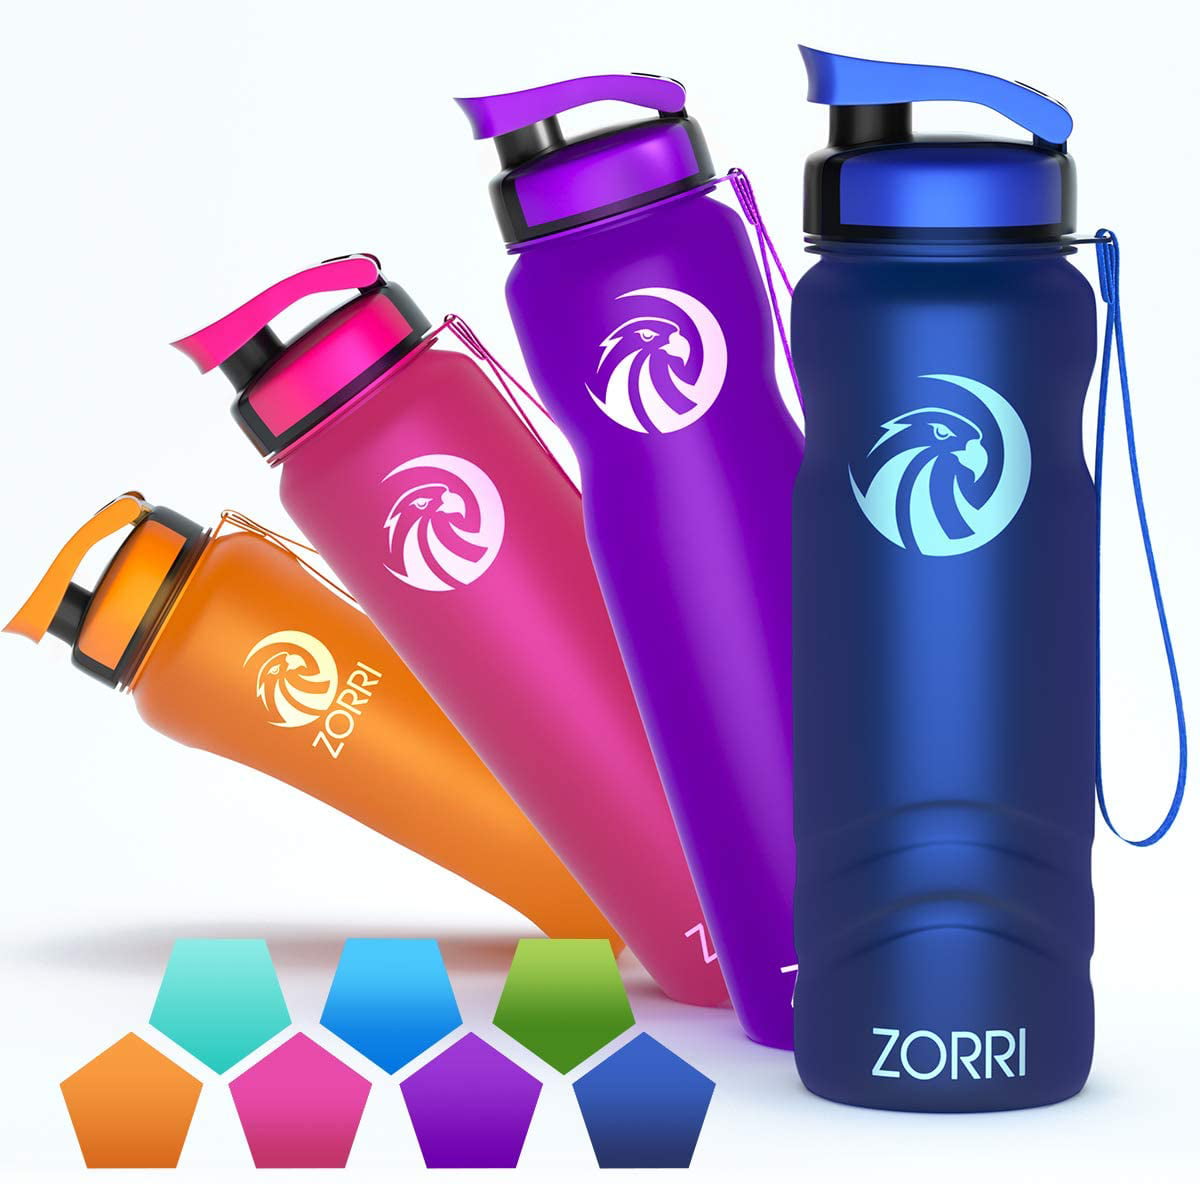 1.2L/1 Liter / 800/ 600ml Eco-Friendly Large Reusable Bottles BPA Free Leak Proof Drinking Bottles With Filter & Flip Top Lid For Gym,Camping,Cycling,Hiking,Yoga,Running Best Sports Water Bottle